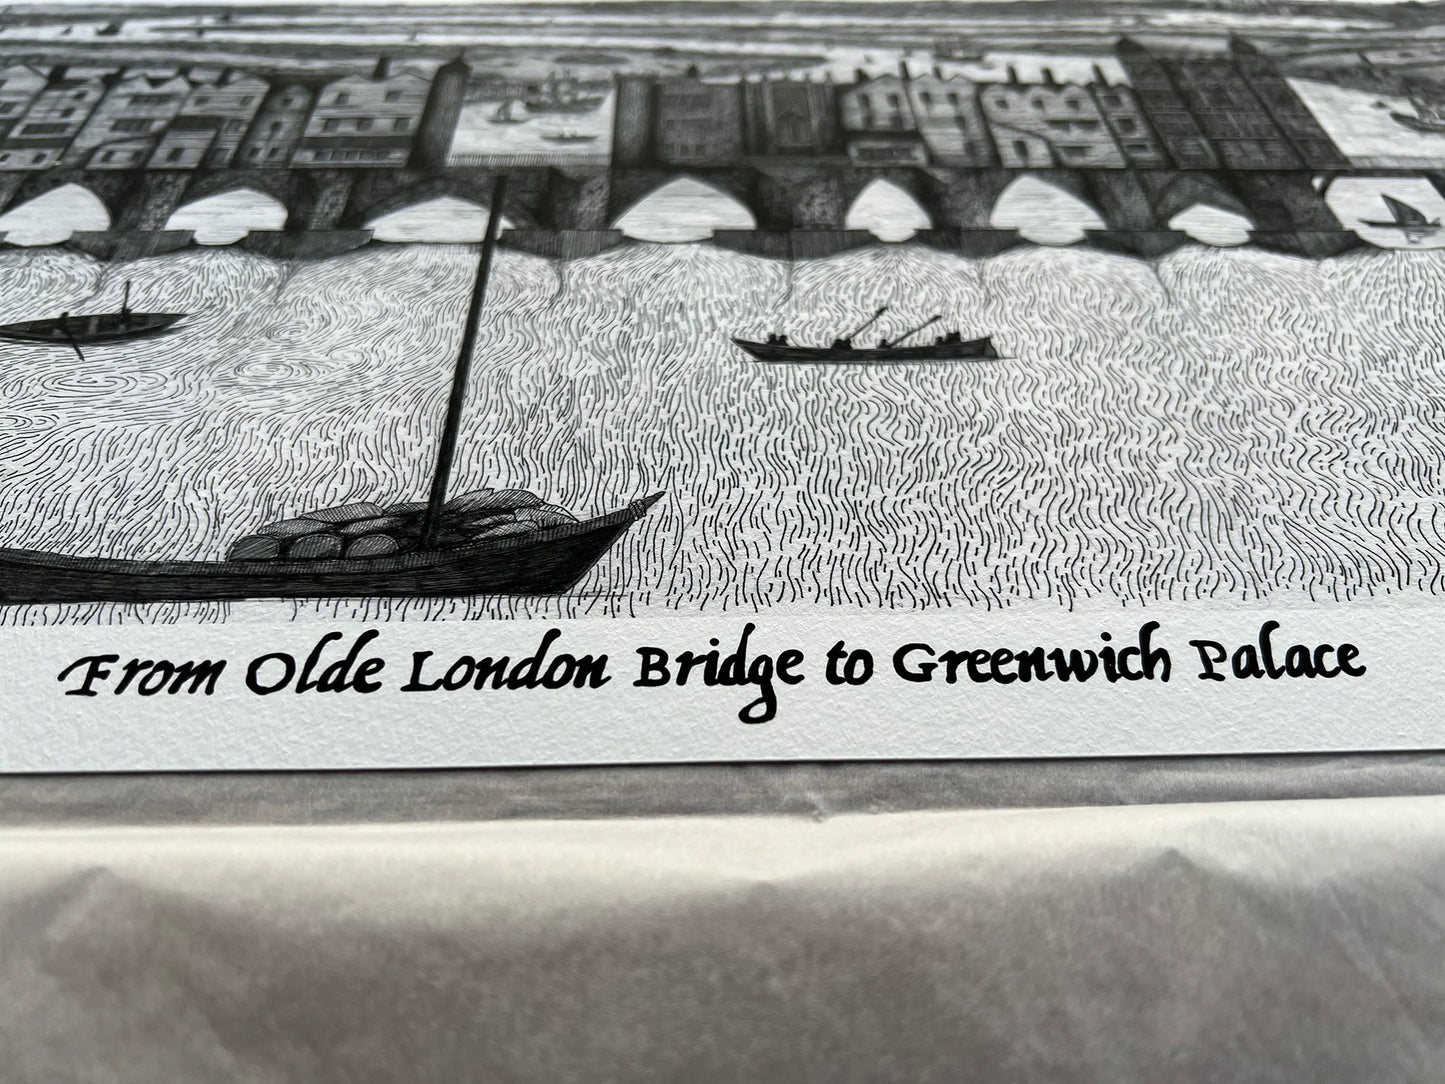 From Olde London Bridge to Greenwich Palace (9 x 23.4 inches test print)